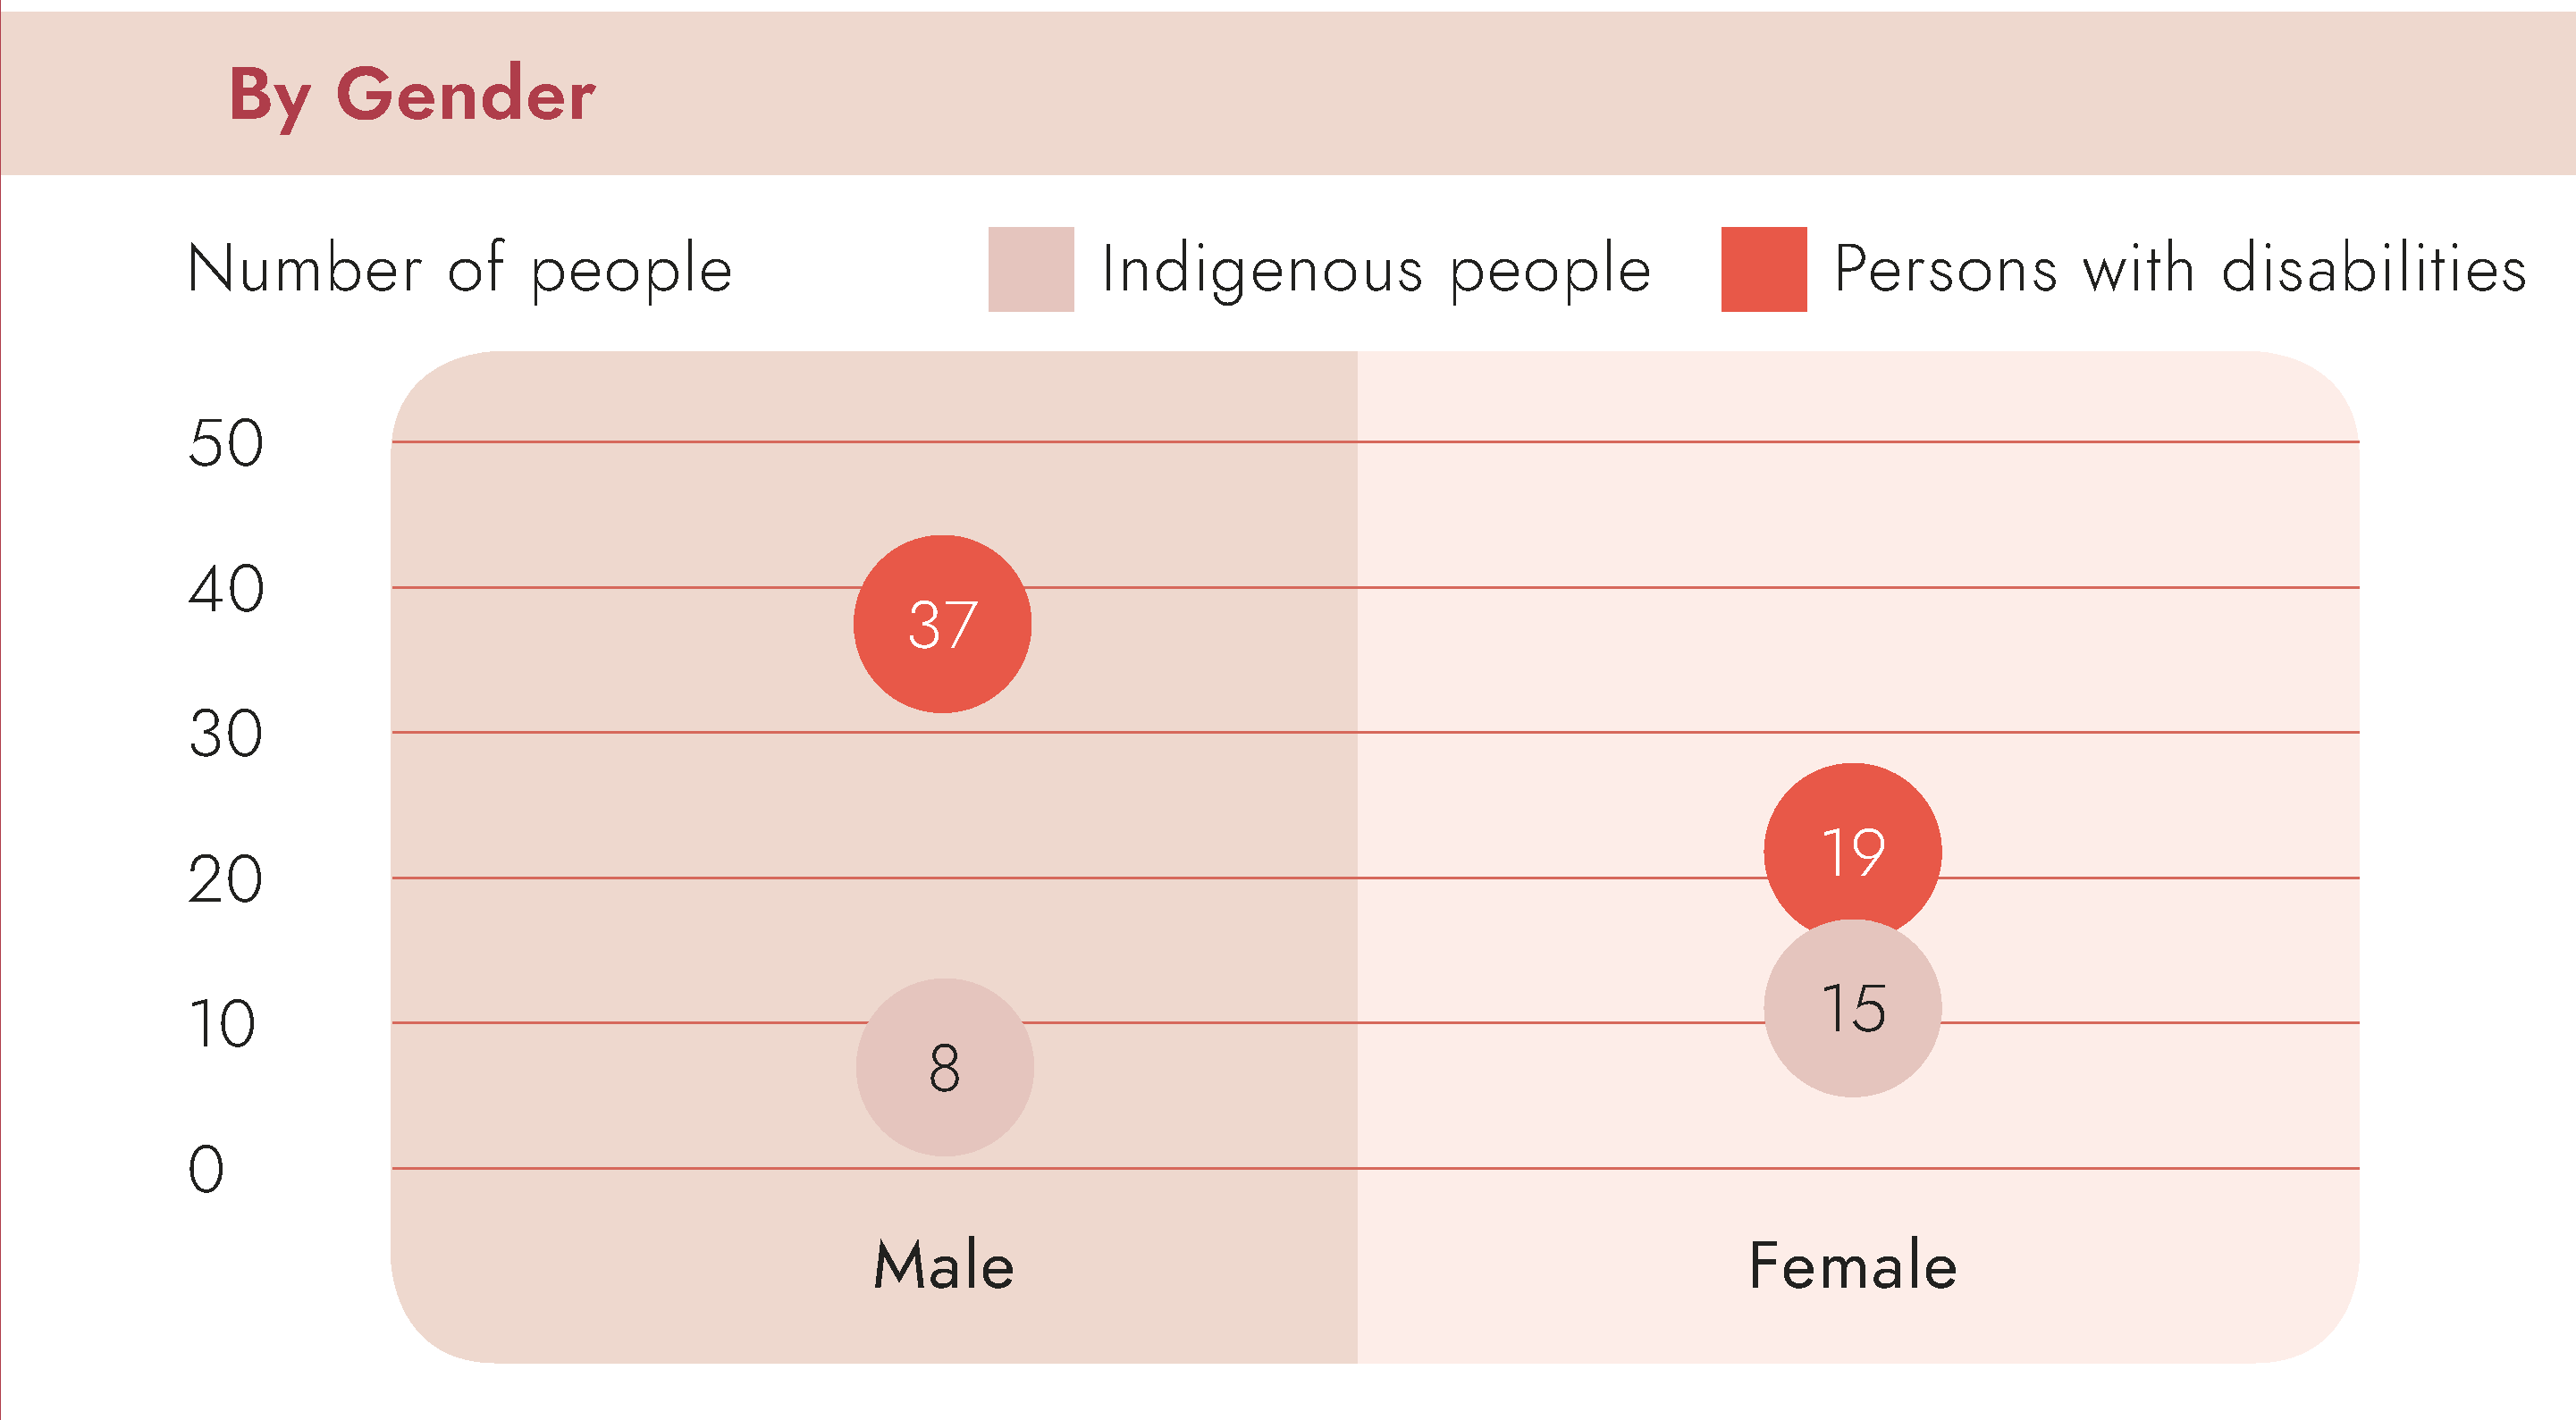 Accession of Persons with Disabilities and Indigenous Peoples-By Gender